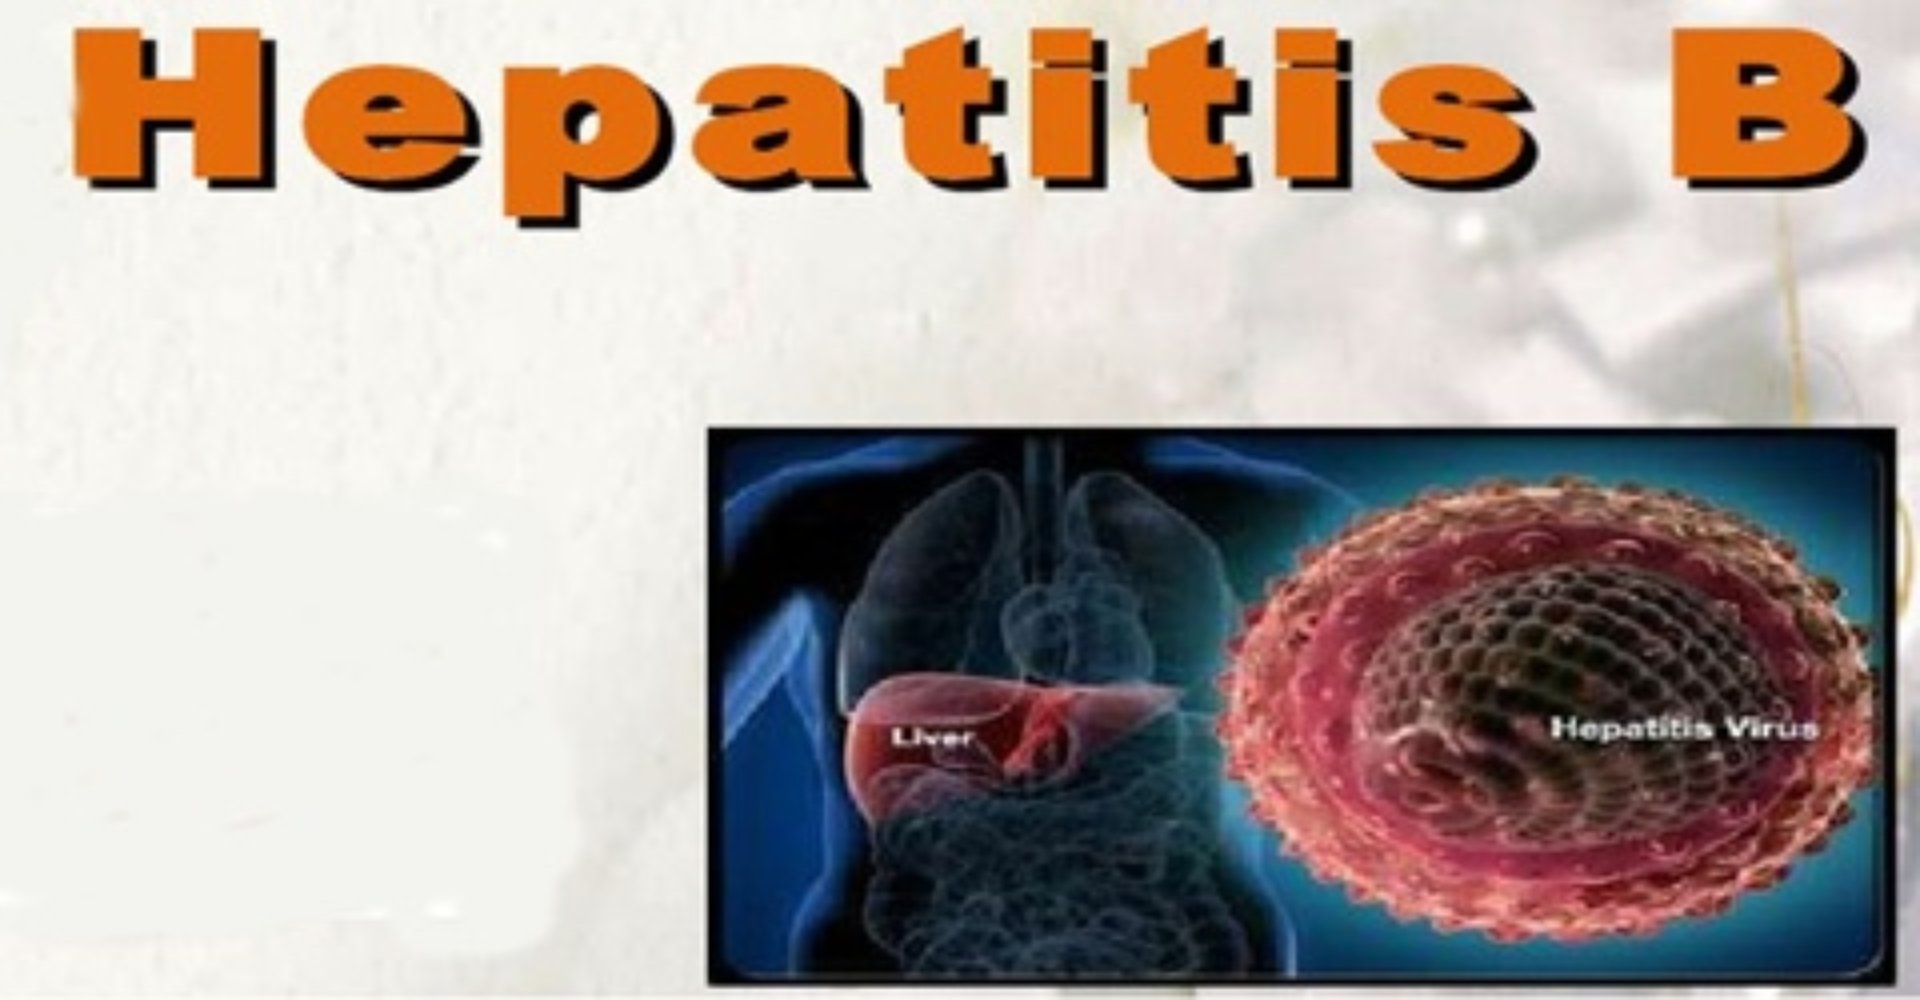 All You Need To Know About the Deadly Hepatitis B